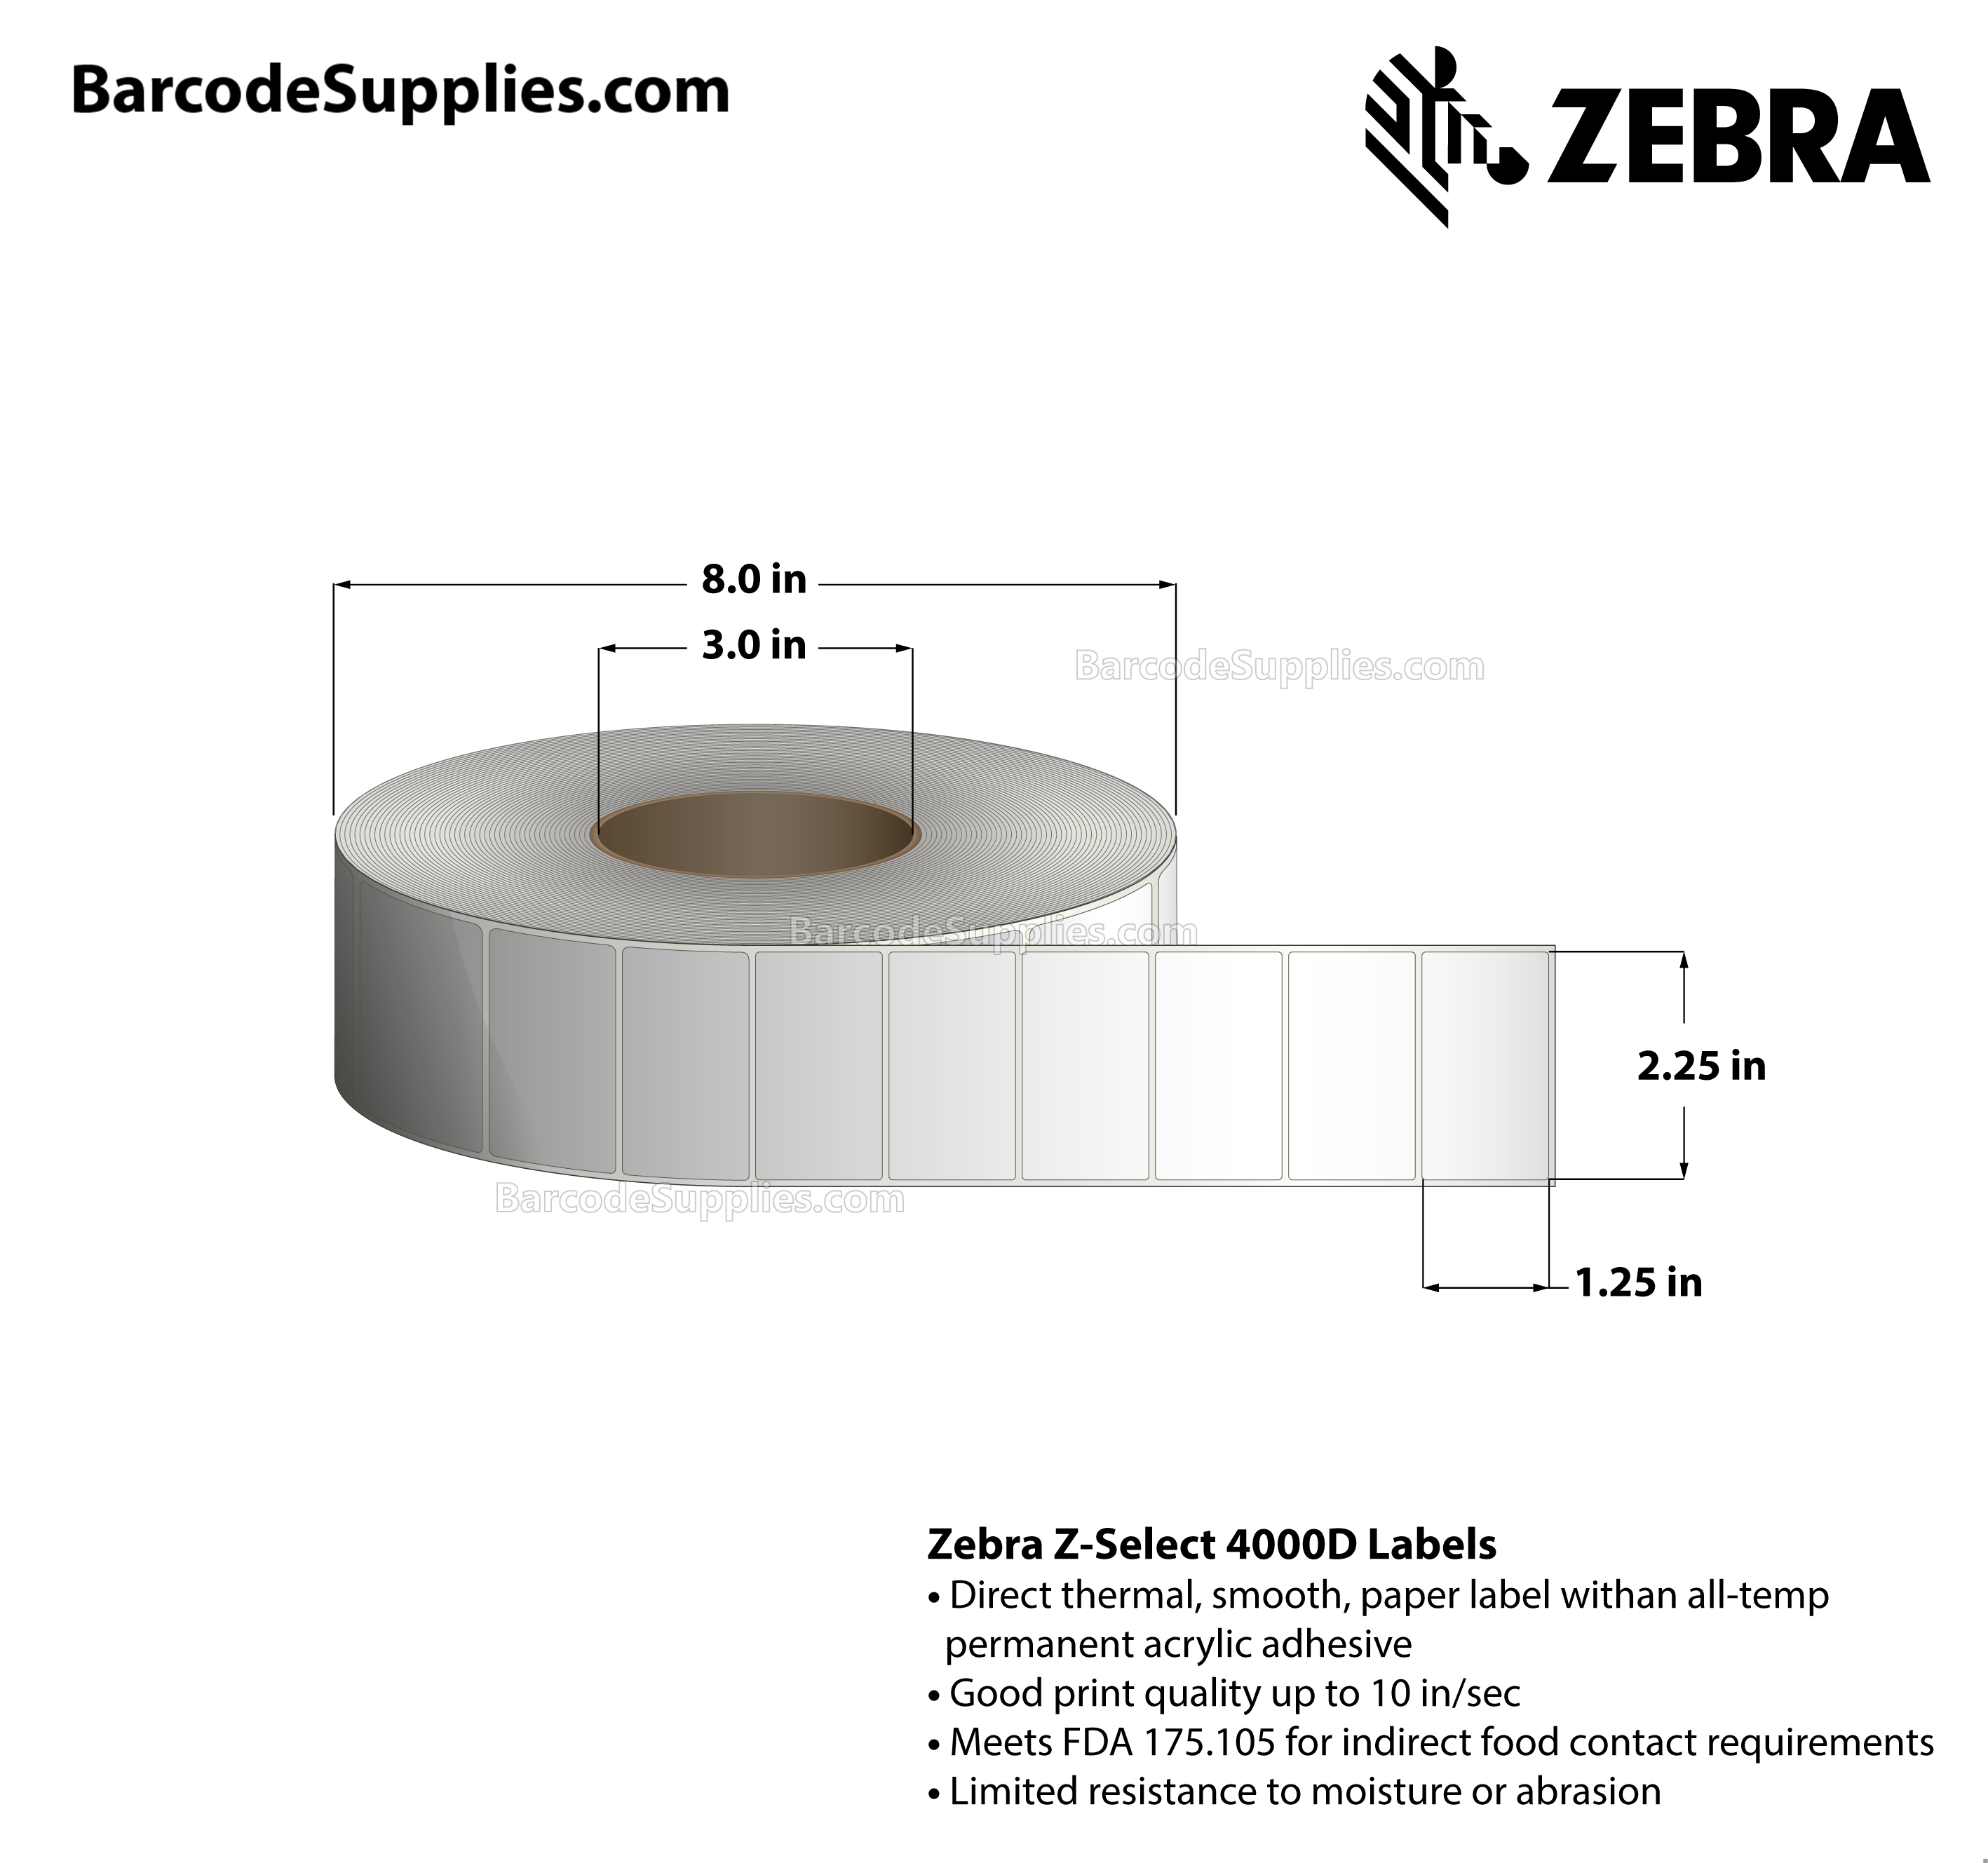 2.25 x 1.25 Direct Thermal White Z-Select 4000D (No Perf) Labels With All-Temp Adhesive - Not Perforated - 3770 Labels Per Roll - Carton Of 8 Rolls - 30160 Labels Total - MPN: 72276